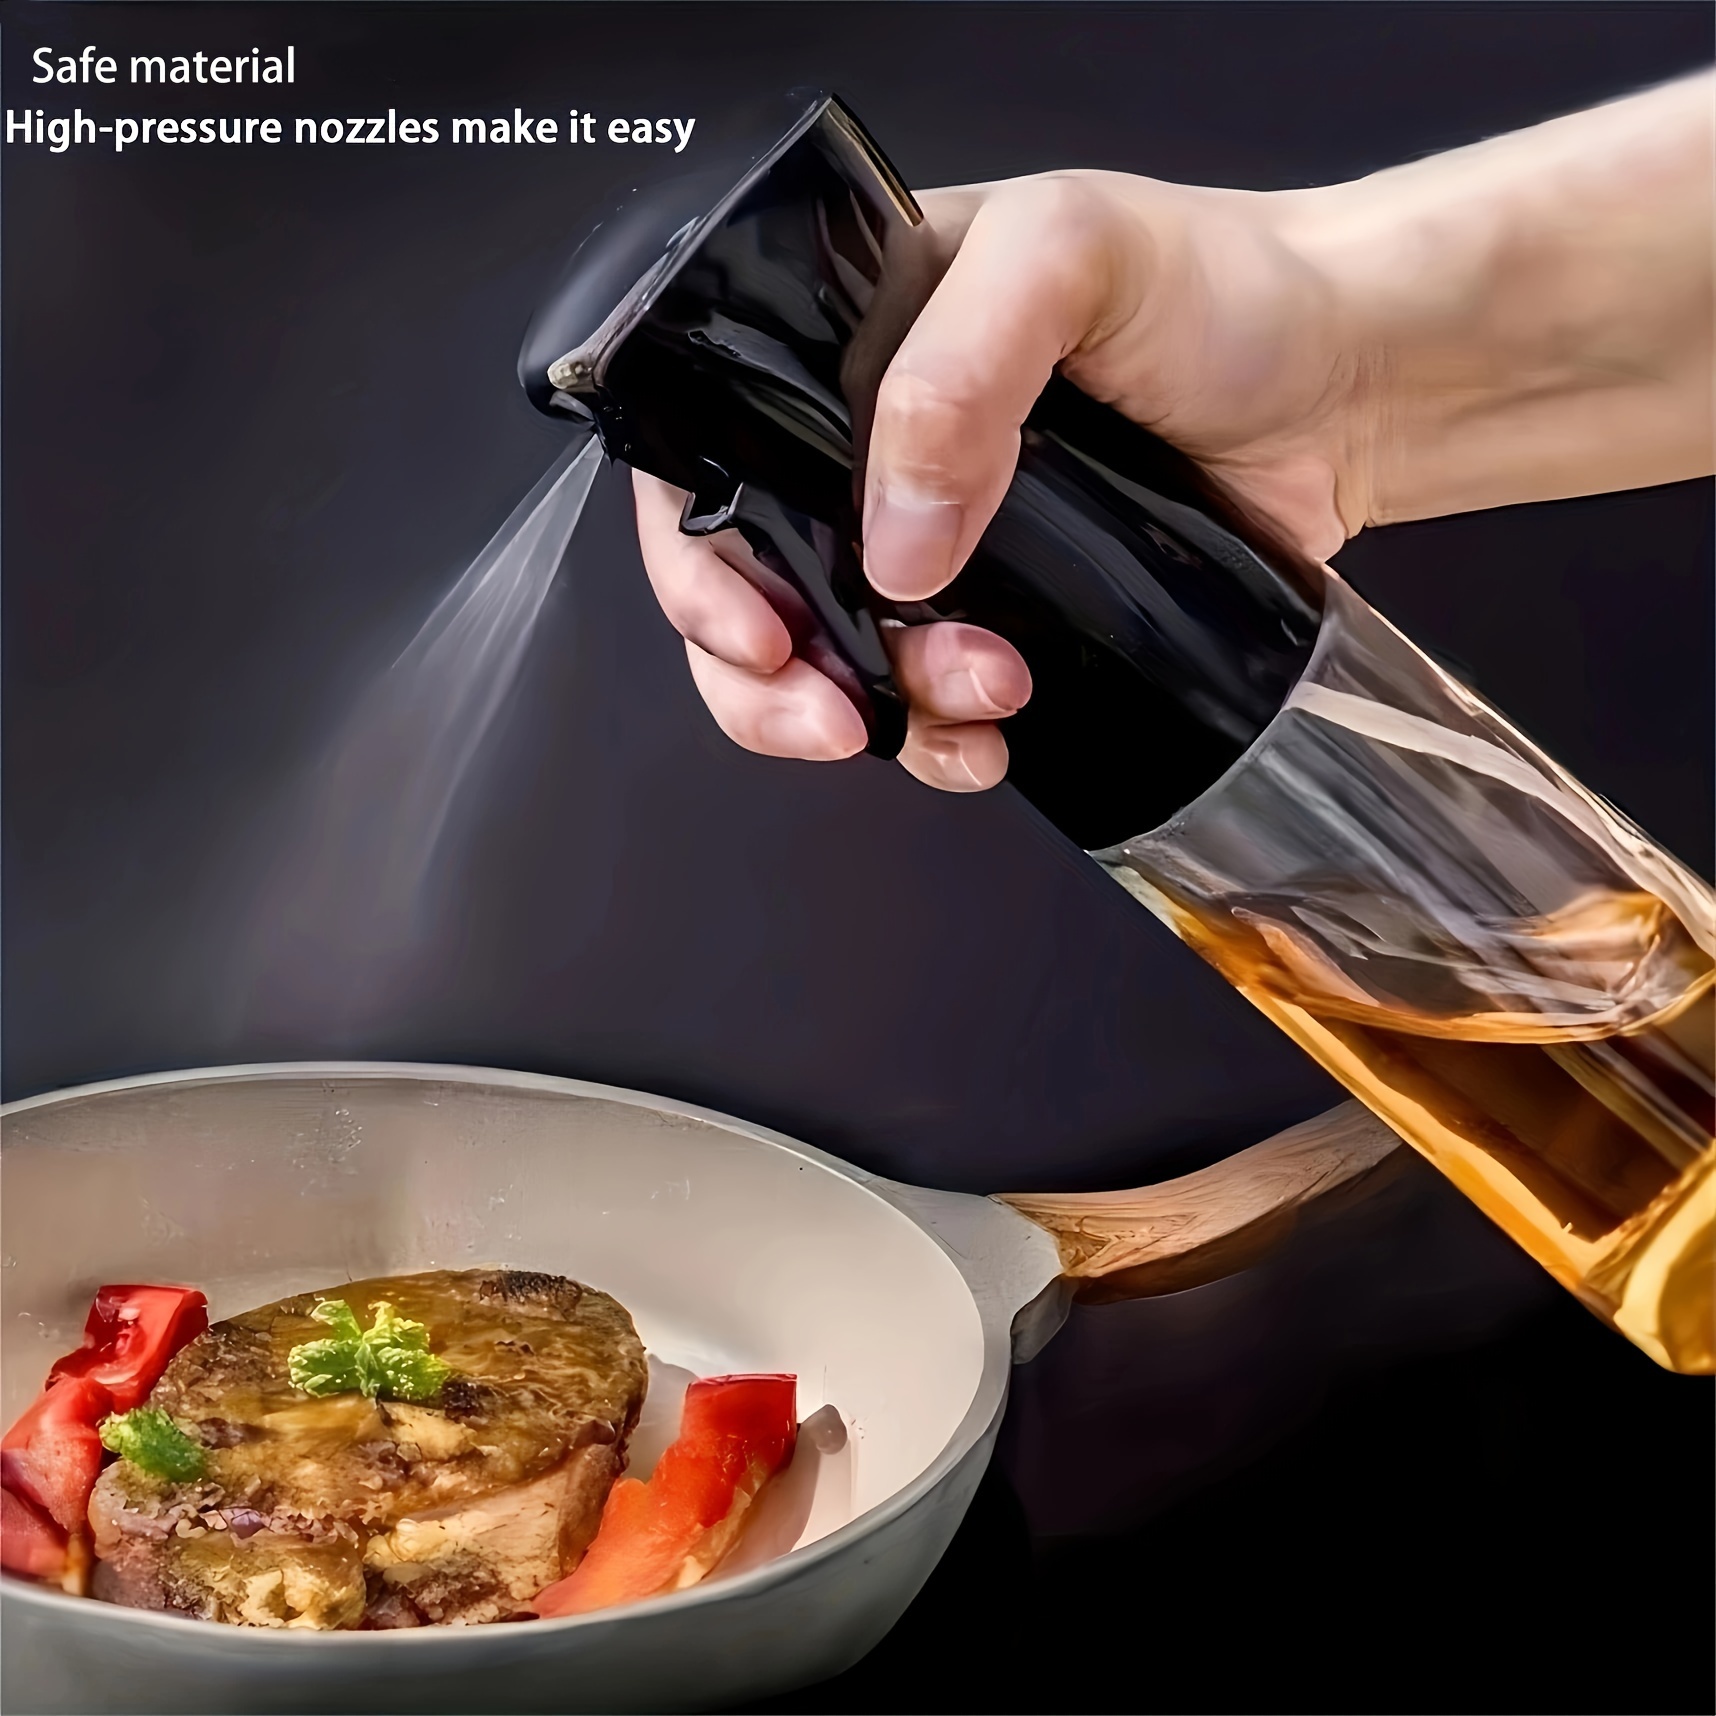 1pc 300ml Glass Oil Sprayer Mister For Healthy Cooking - Kitchen Gadgets  For Salad, BBQ, Baking, And Roasting